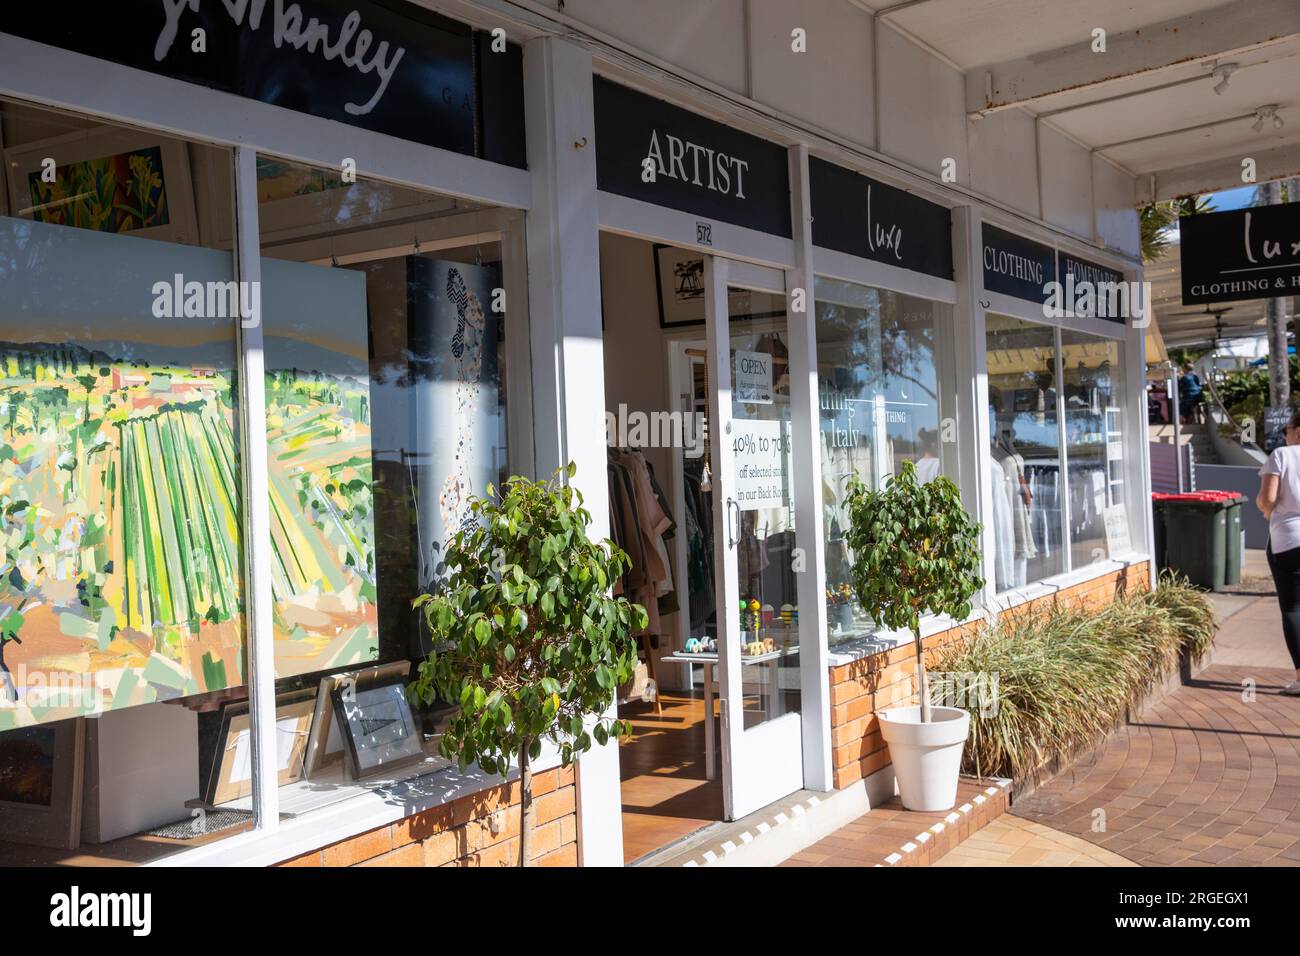 Hervey Bay city in southern Queensland and local artist Ashleigh Murray store selling art and clothing,Queensland,Australia Stock Photo